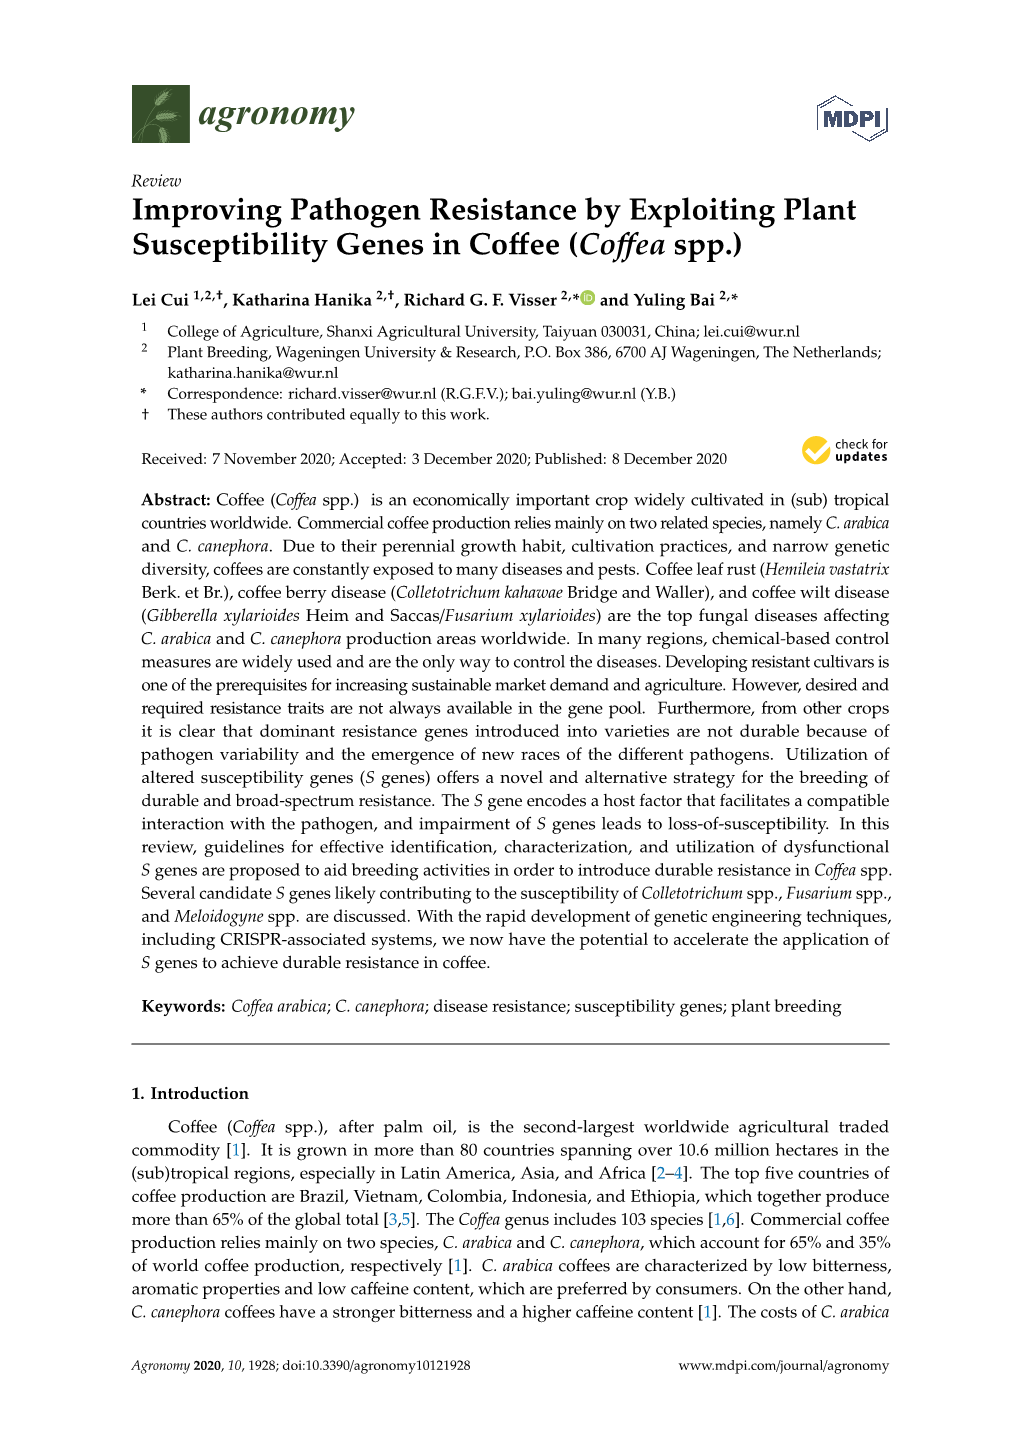 Improving Pathogen Resistance by Exploiting Plant Susceptibility Genes in Coffee (Coffea Spp.)